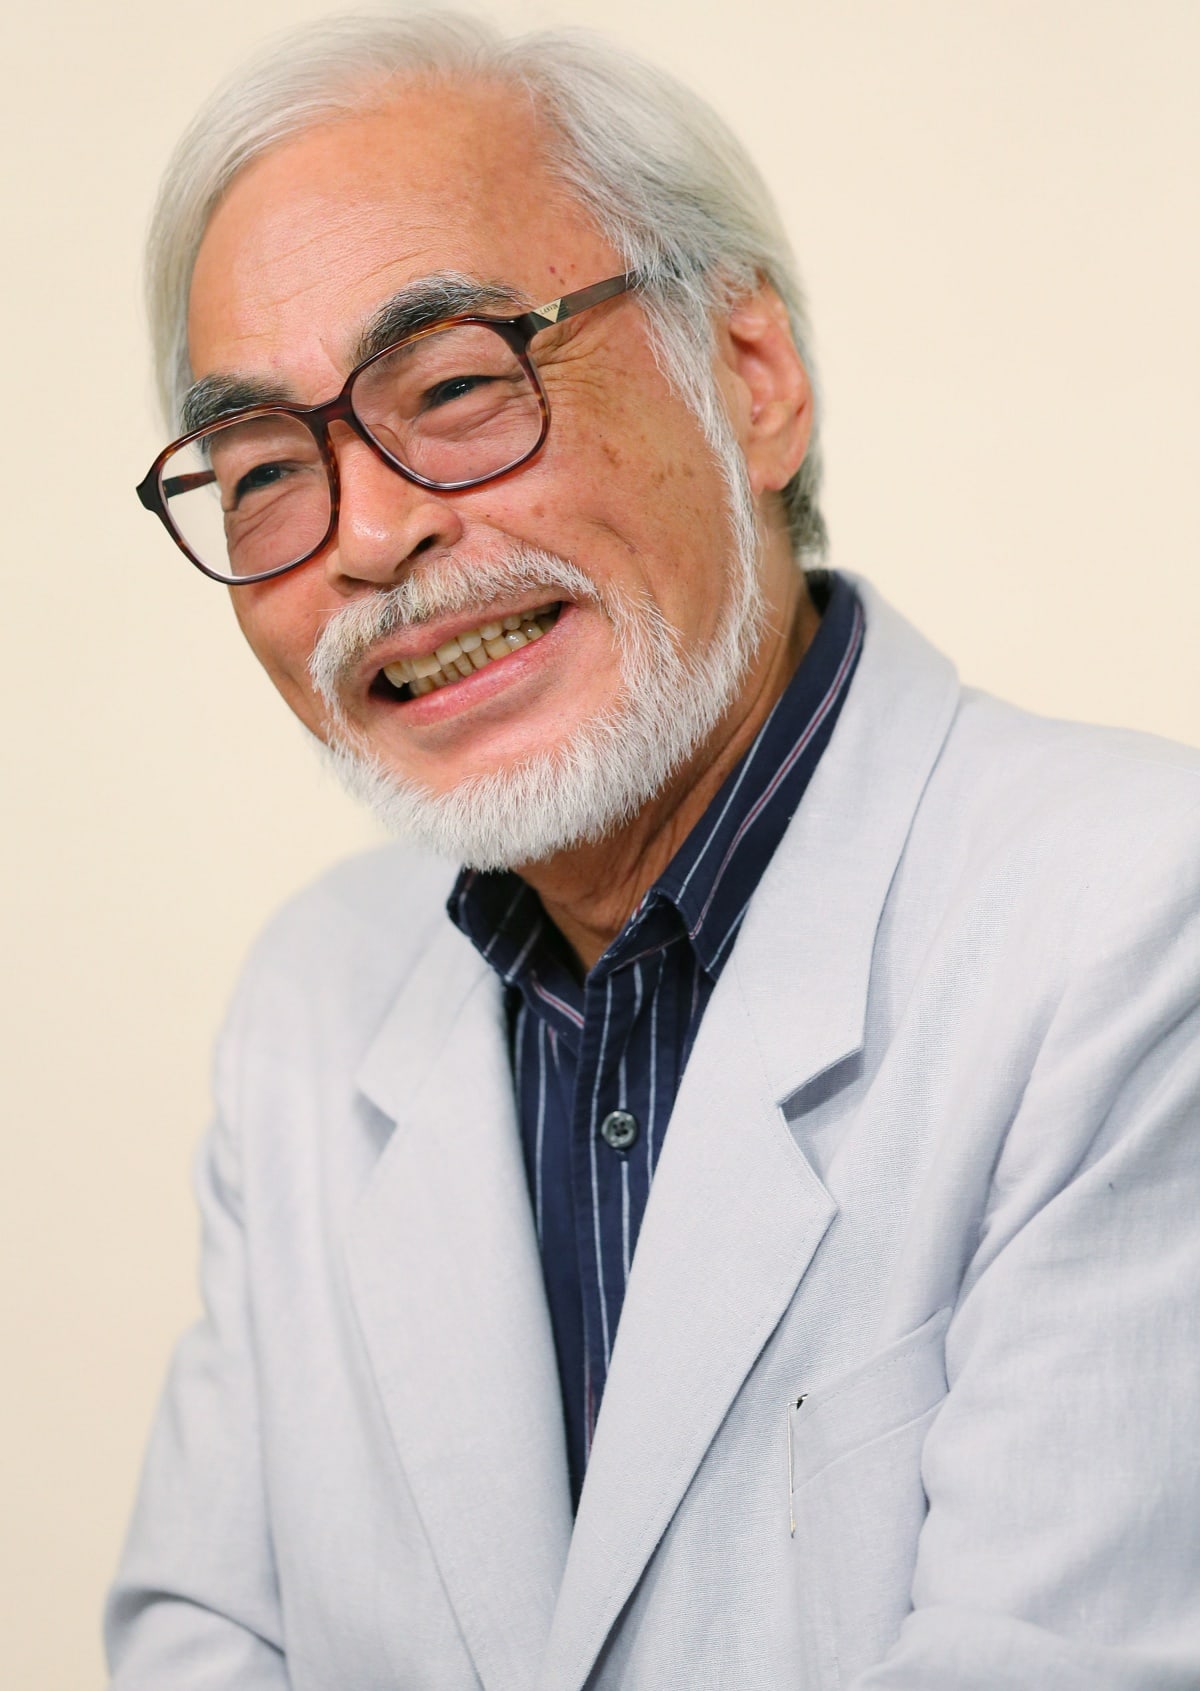 Hayao Miyazaki is a co-founder of Studio Ghibli and highly regarded as one of the most accomplished filmmakers in the history of animation